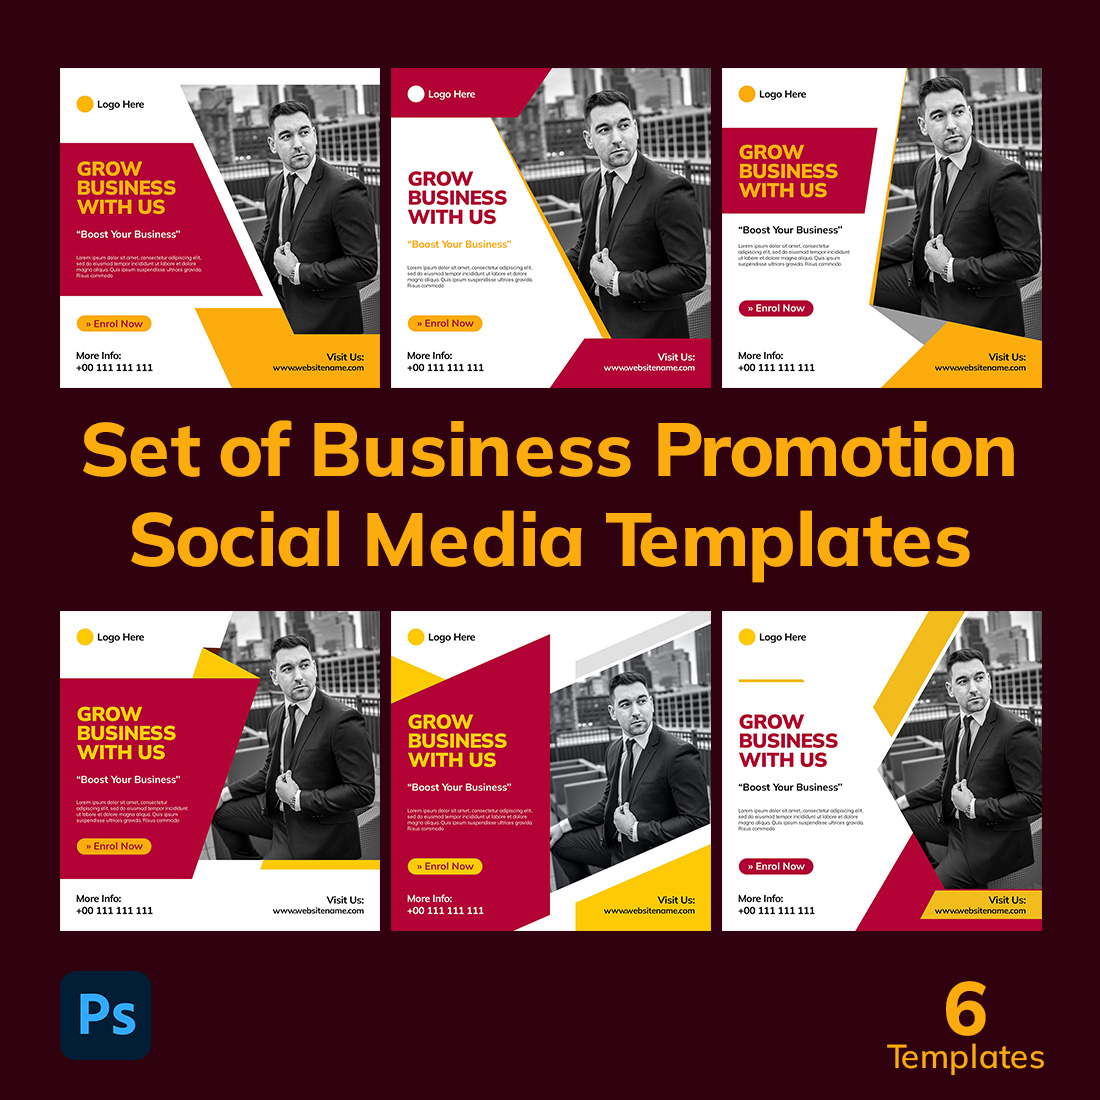 Set of Business Promotion Social Media Templates preview image.